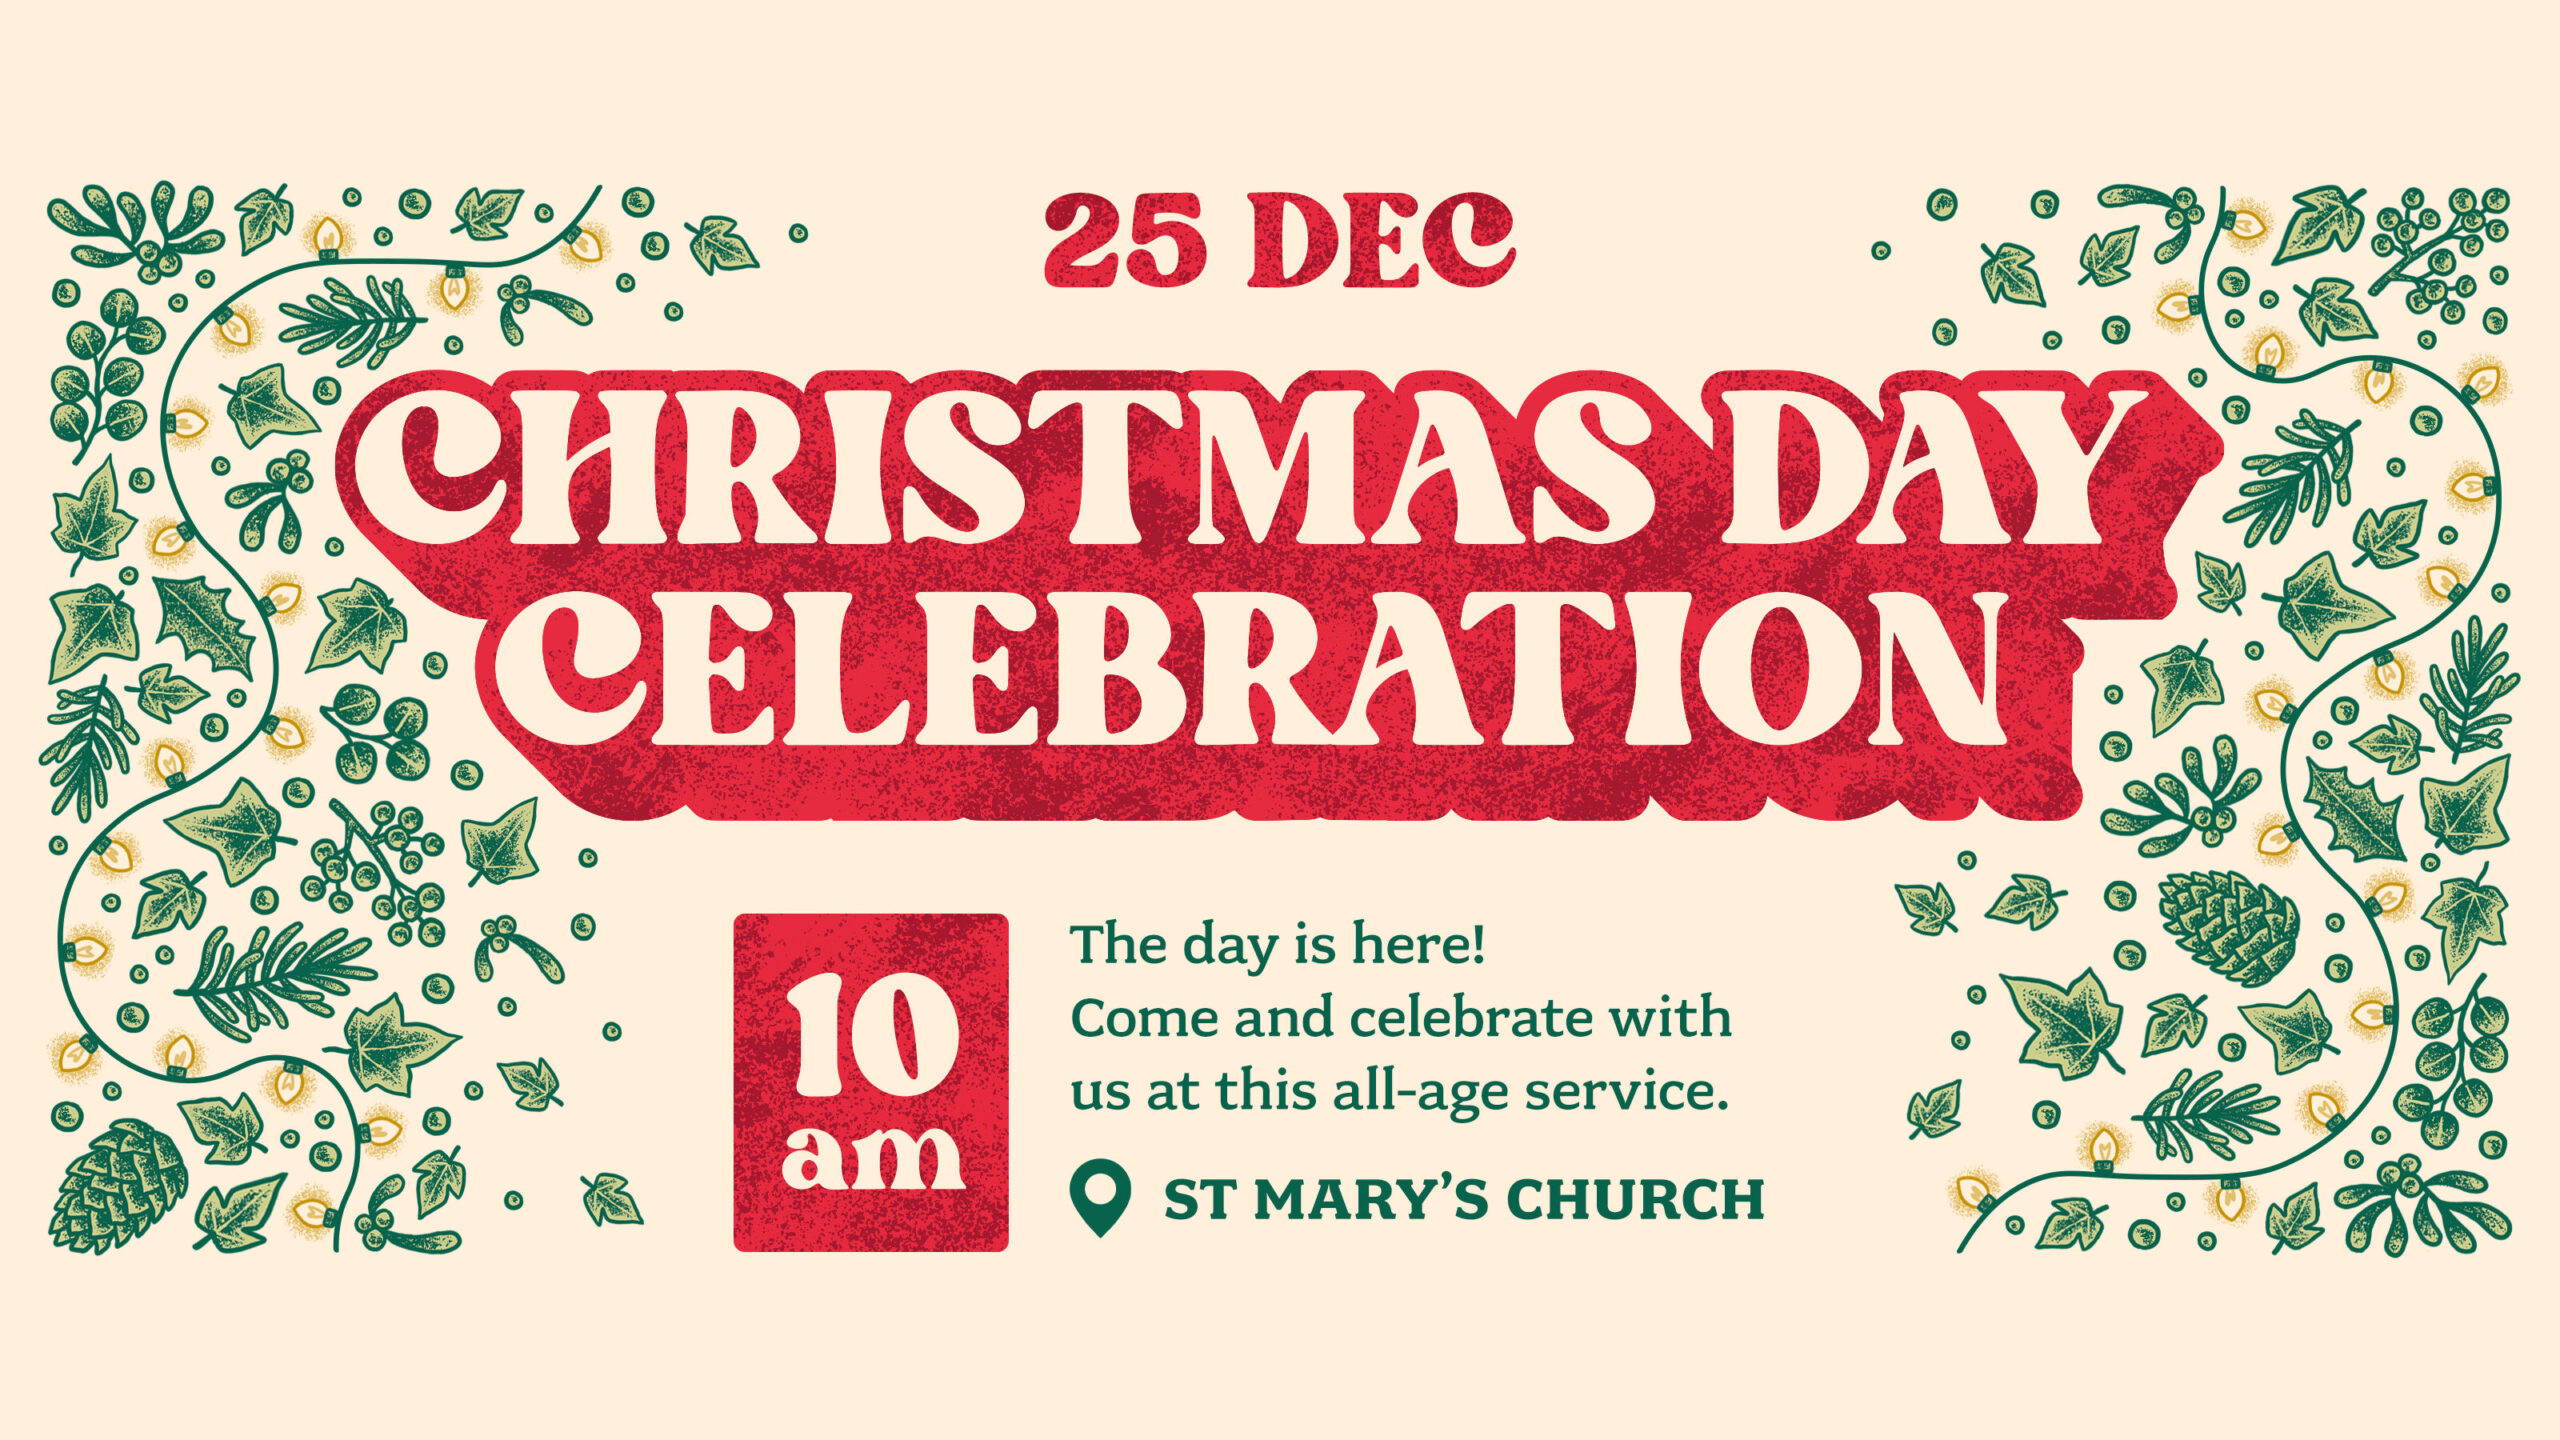 25 Dec, 10am
Christmas Day Celebration
The day is here! Come and celebrate with us at this all-age service.
St Mary's Church